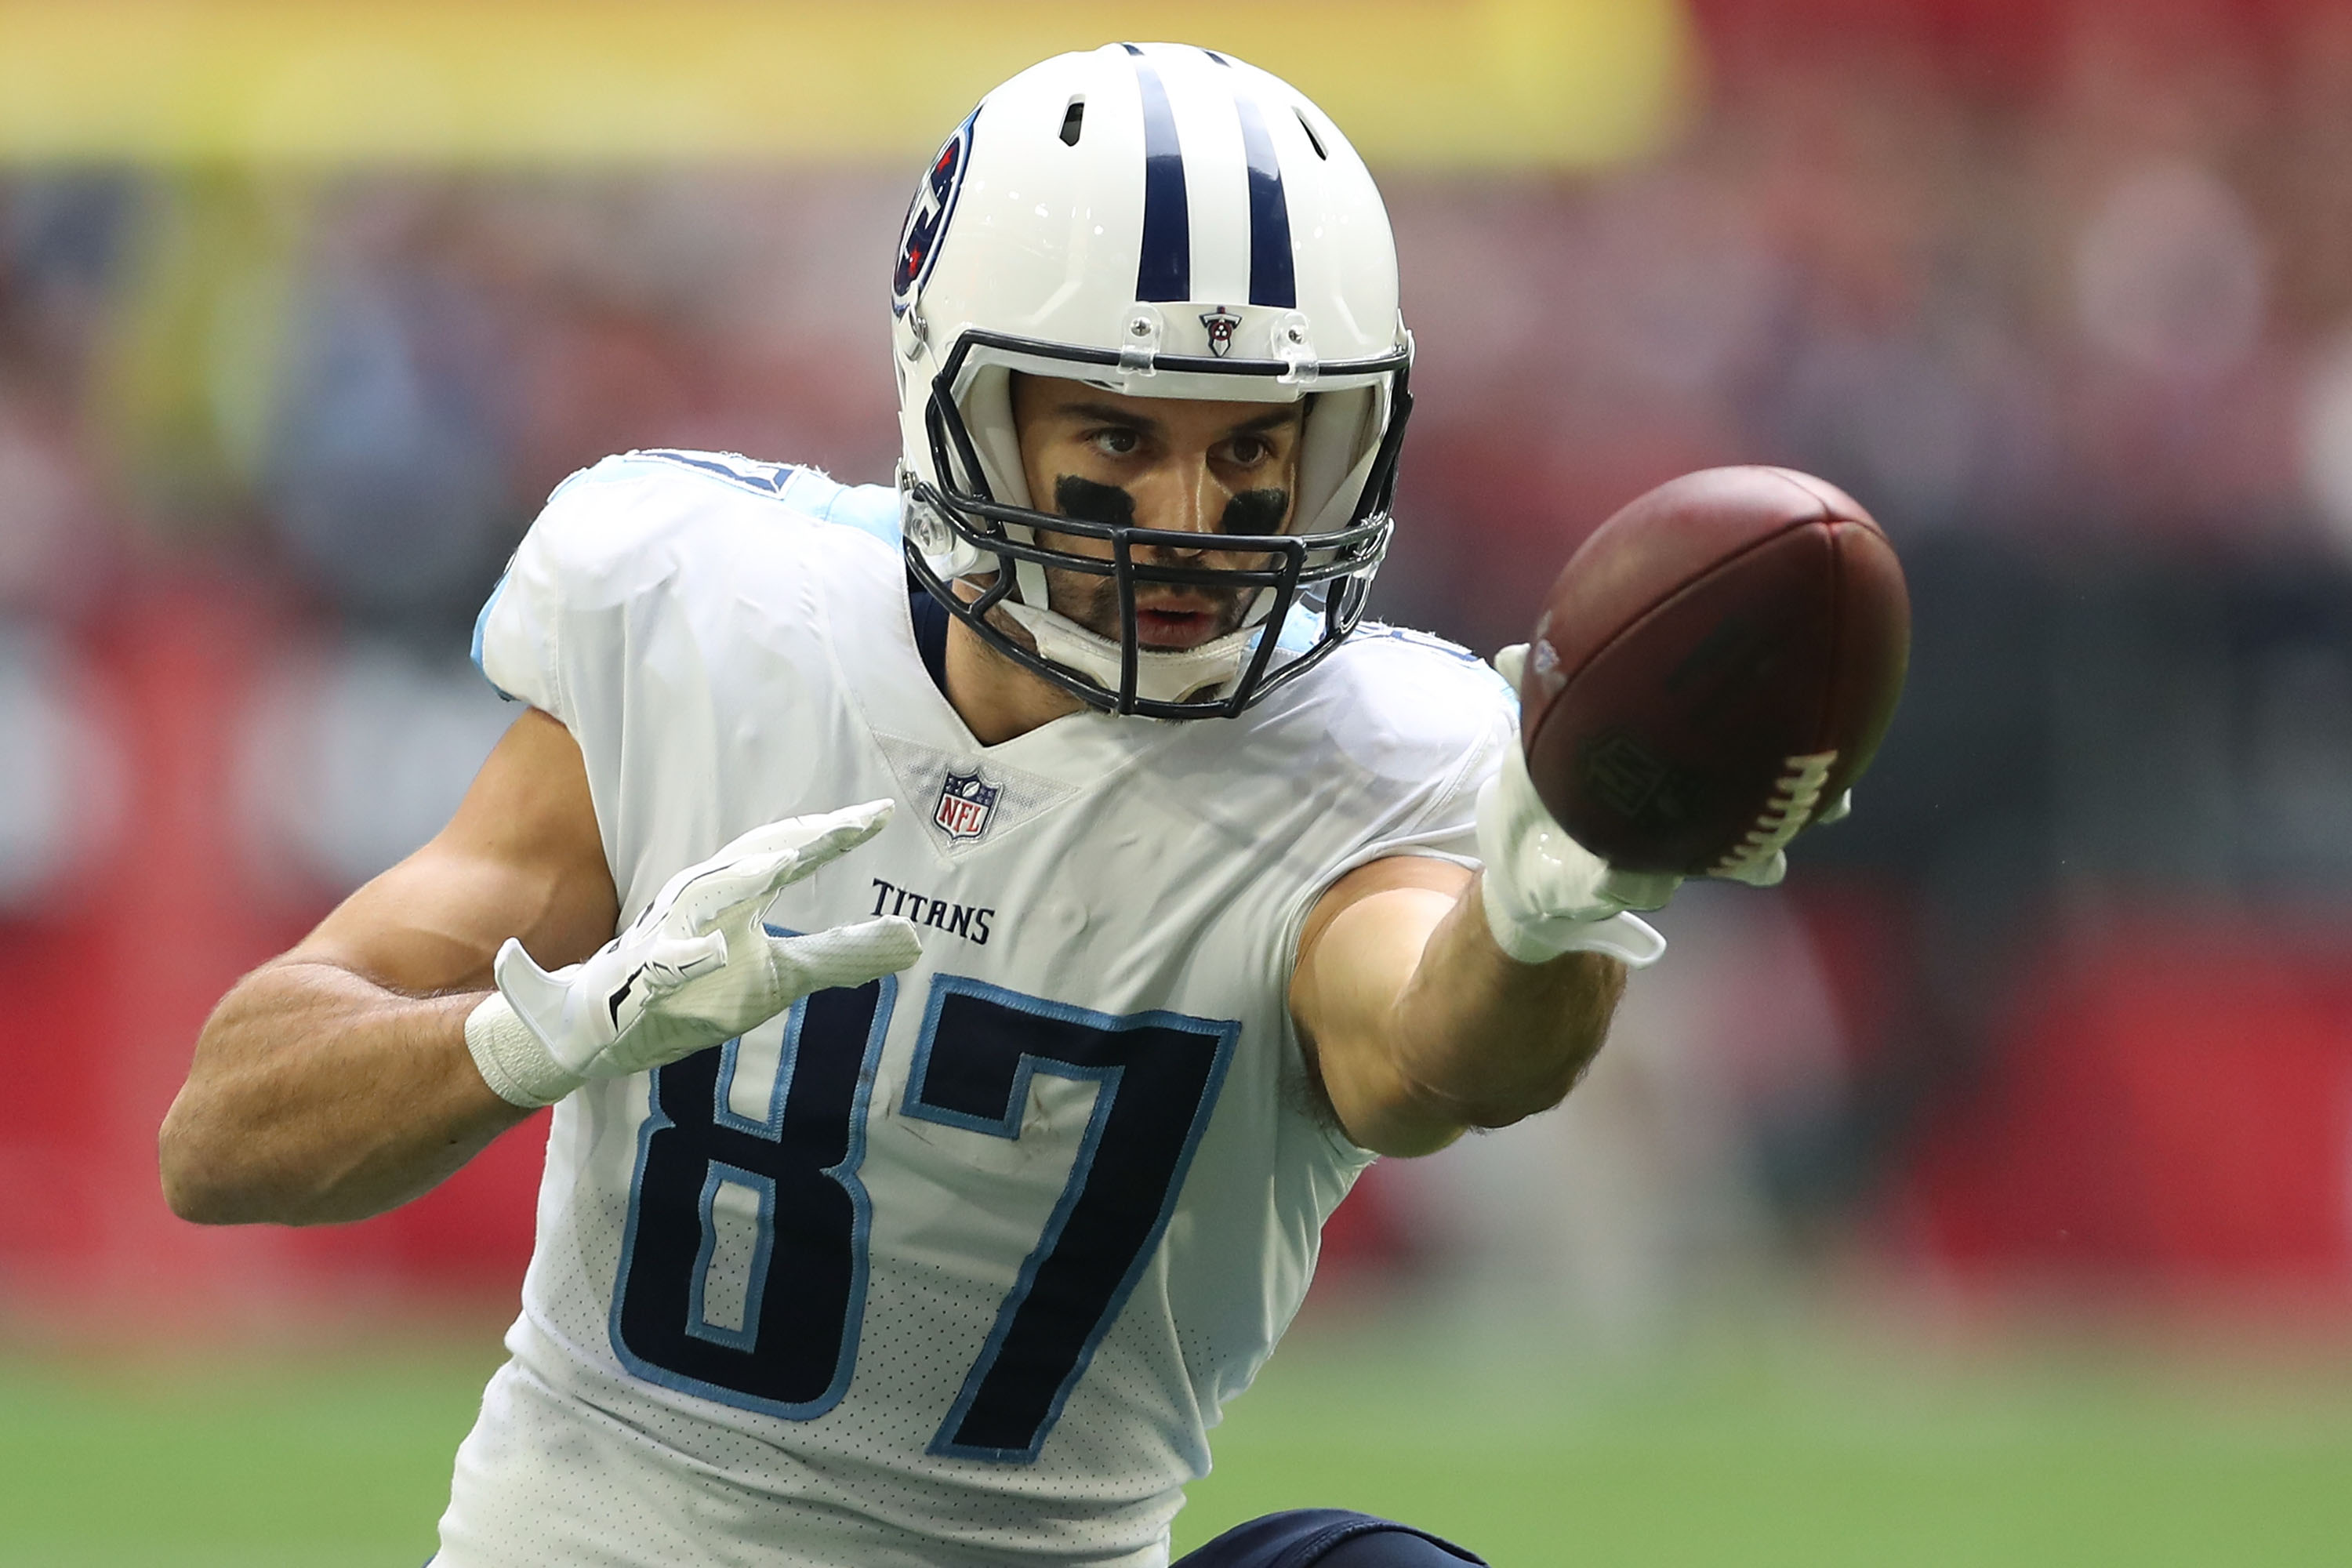 GLENDALE, AZ - Tennessee Titans wide receiver Eric Decker (87) extends for the first down marker after making a catch against the Arizona Cardinals defense at University of Phoenix Stadium.